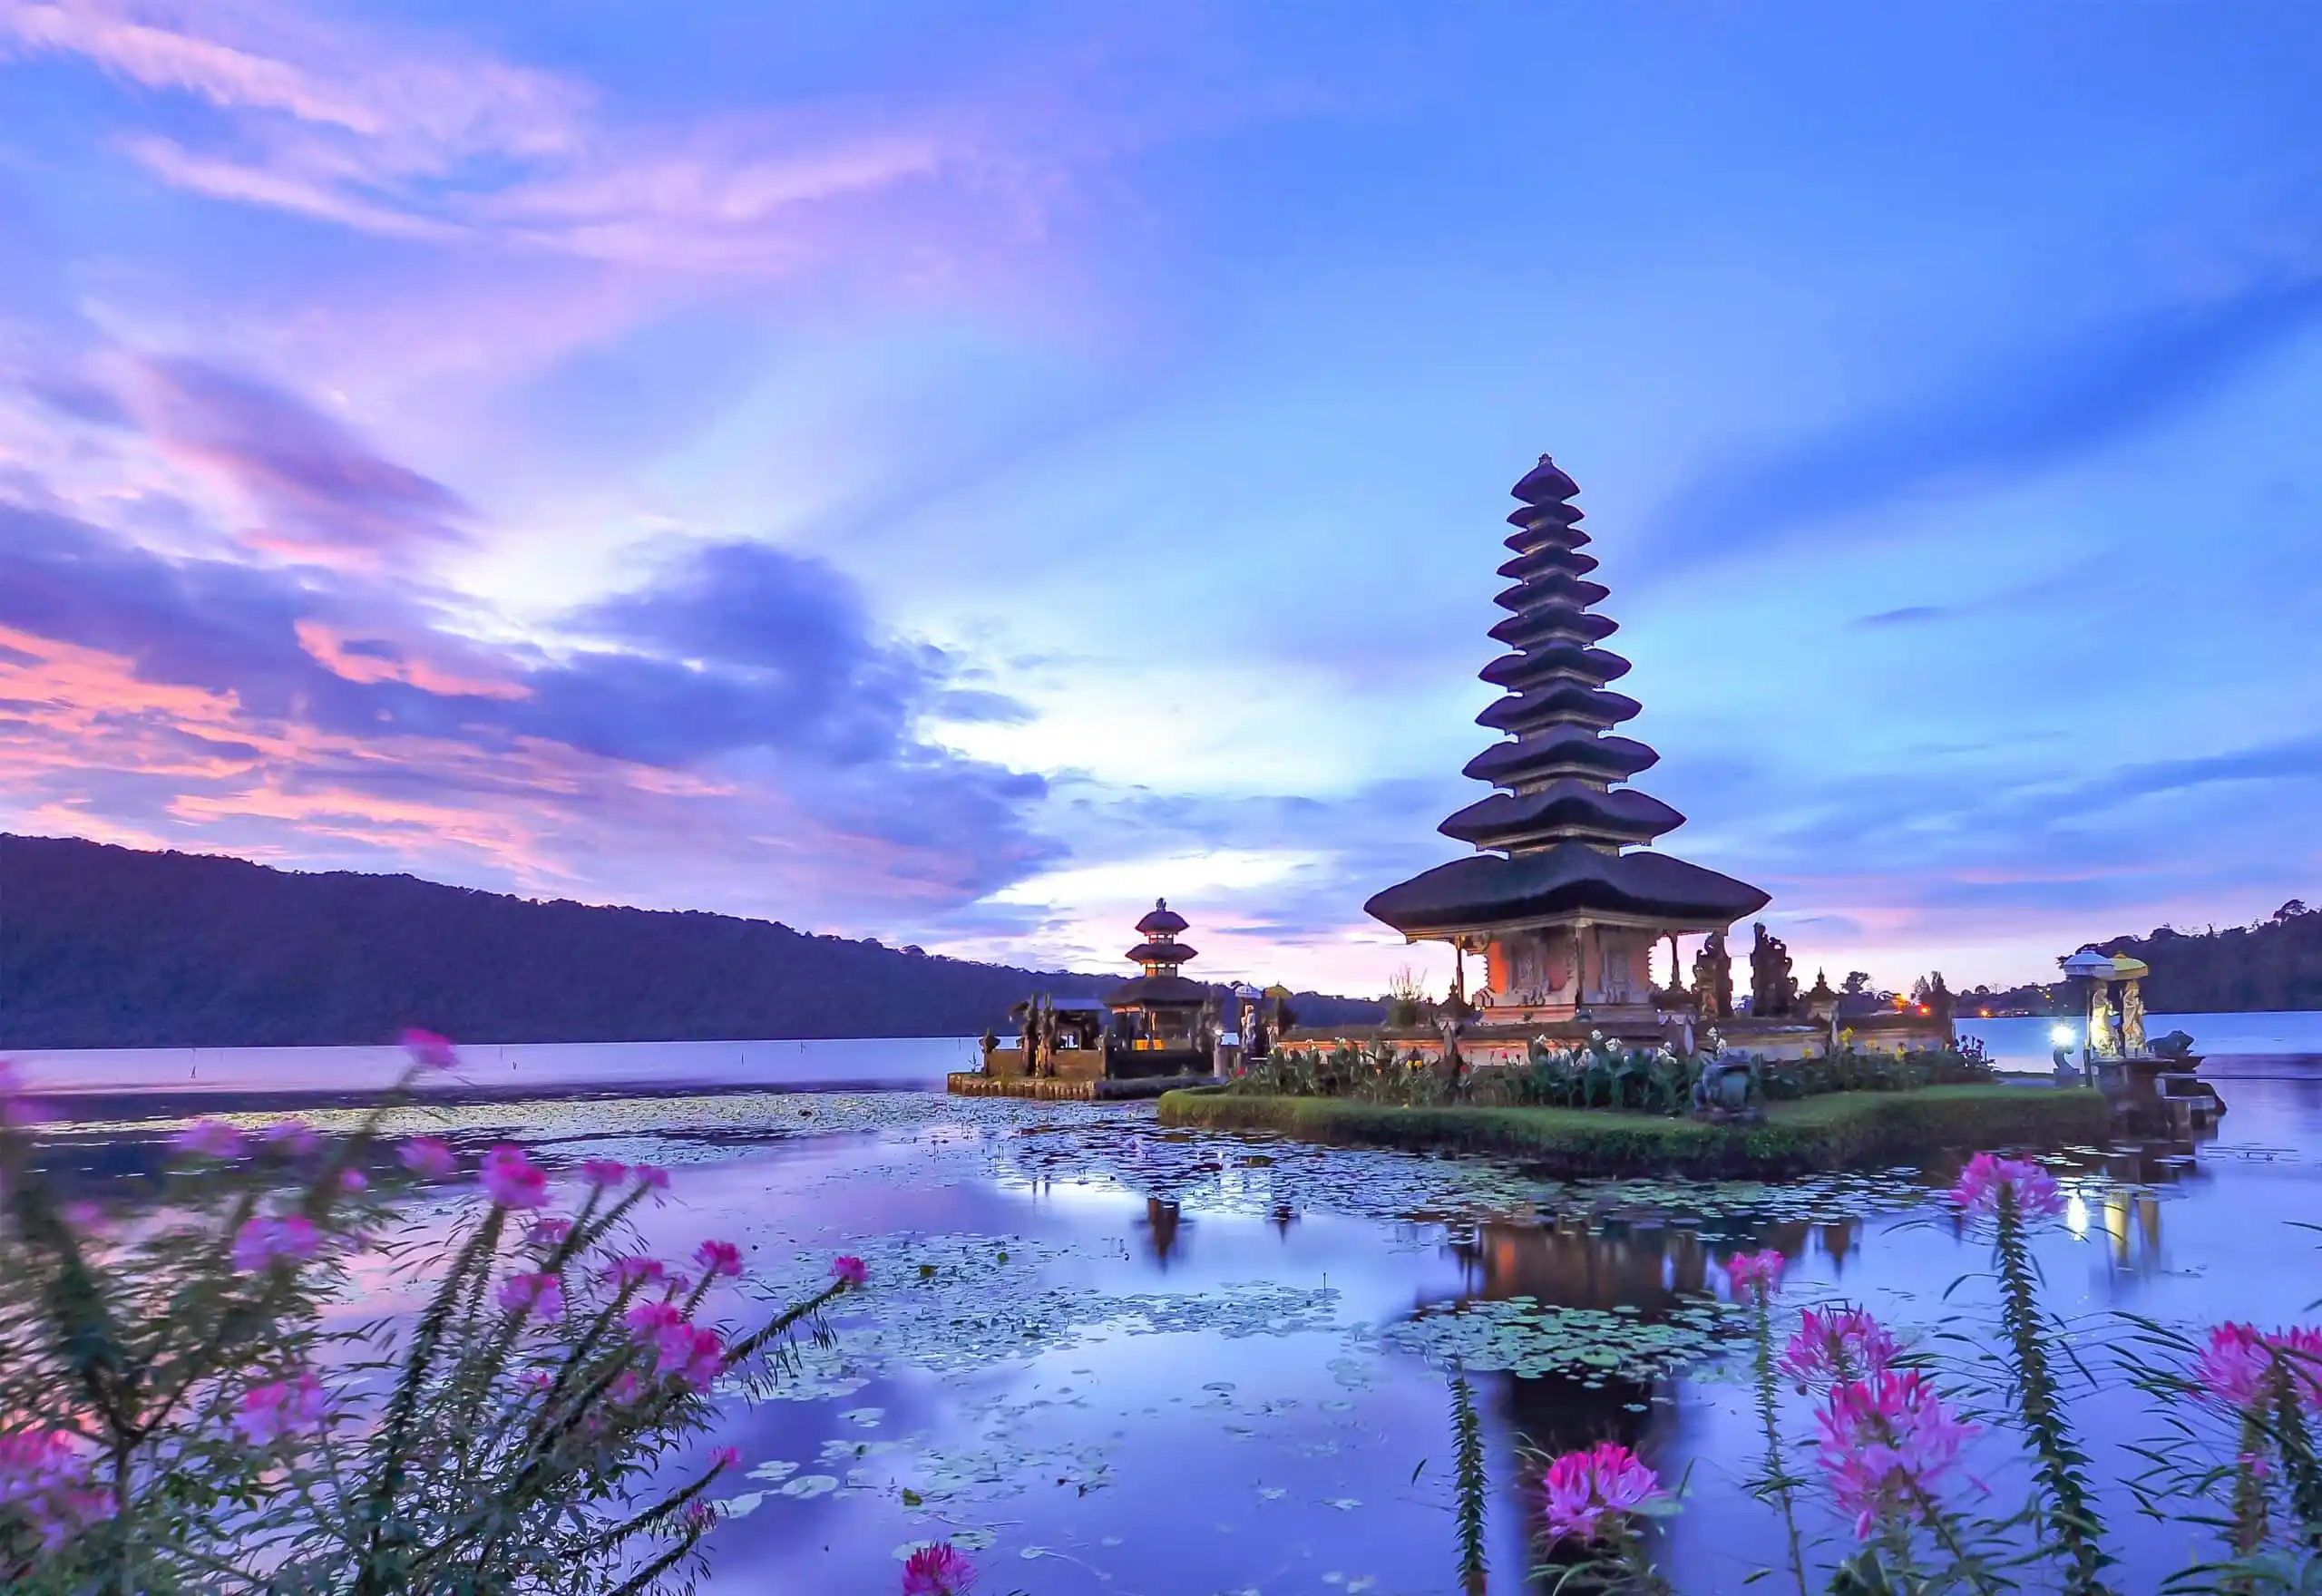 Oil and Gas Training Courses in Bali